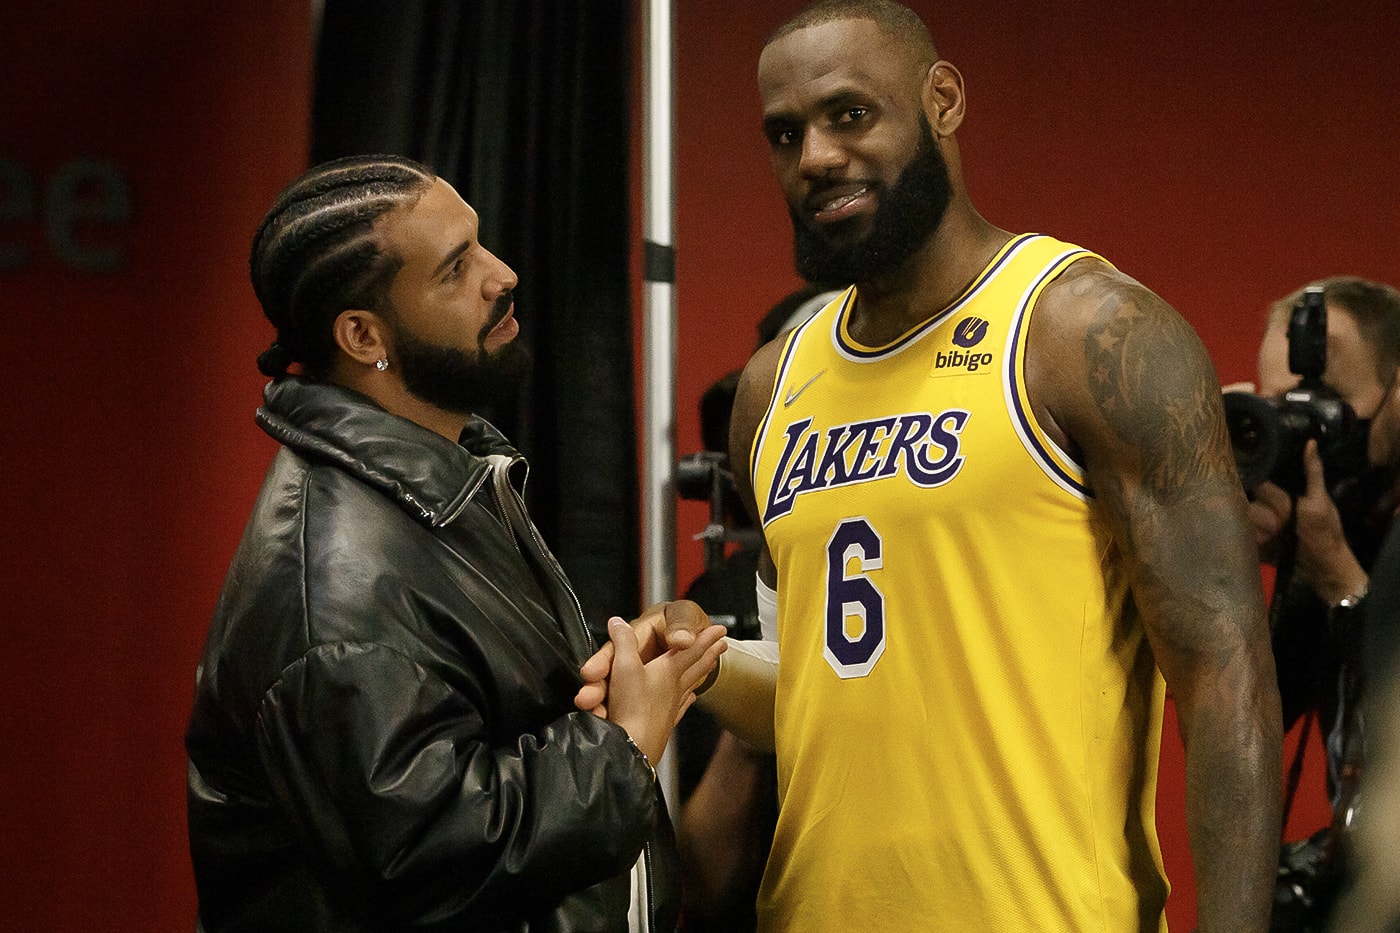 New Netflix Series Shows Drake Hunting for Rare LeBron James Collectible King Of Collectibles: The Goldin Touch ken goldin goldin auctions trading cards LeBron James “Triple Logoman” sports card michael jordan larry bird isaiah thomas